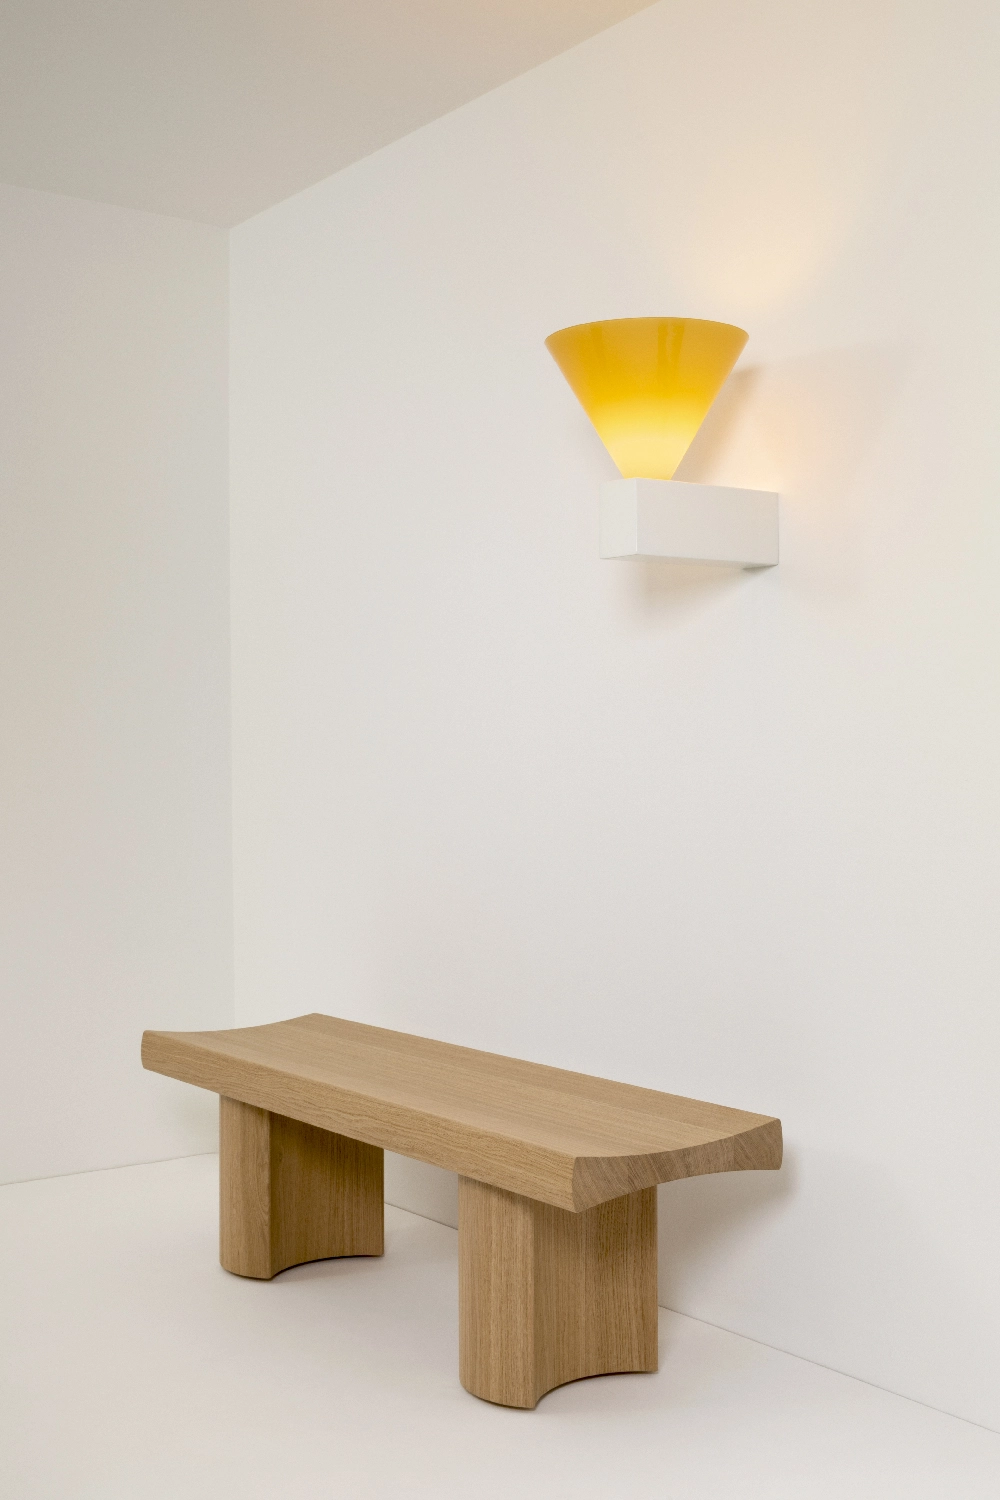 Signal W POLYCHROMATIC - Edward and Jay Barber and Osgerby - Wall light - Galerie kreo